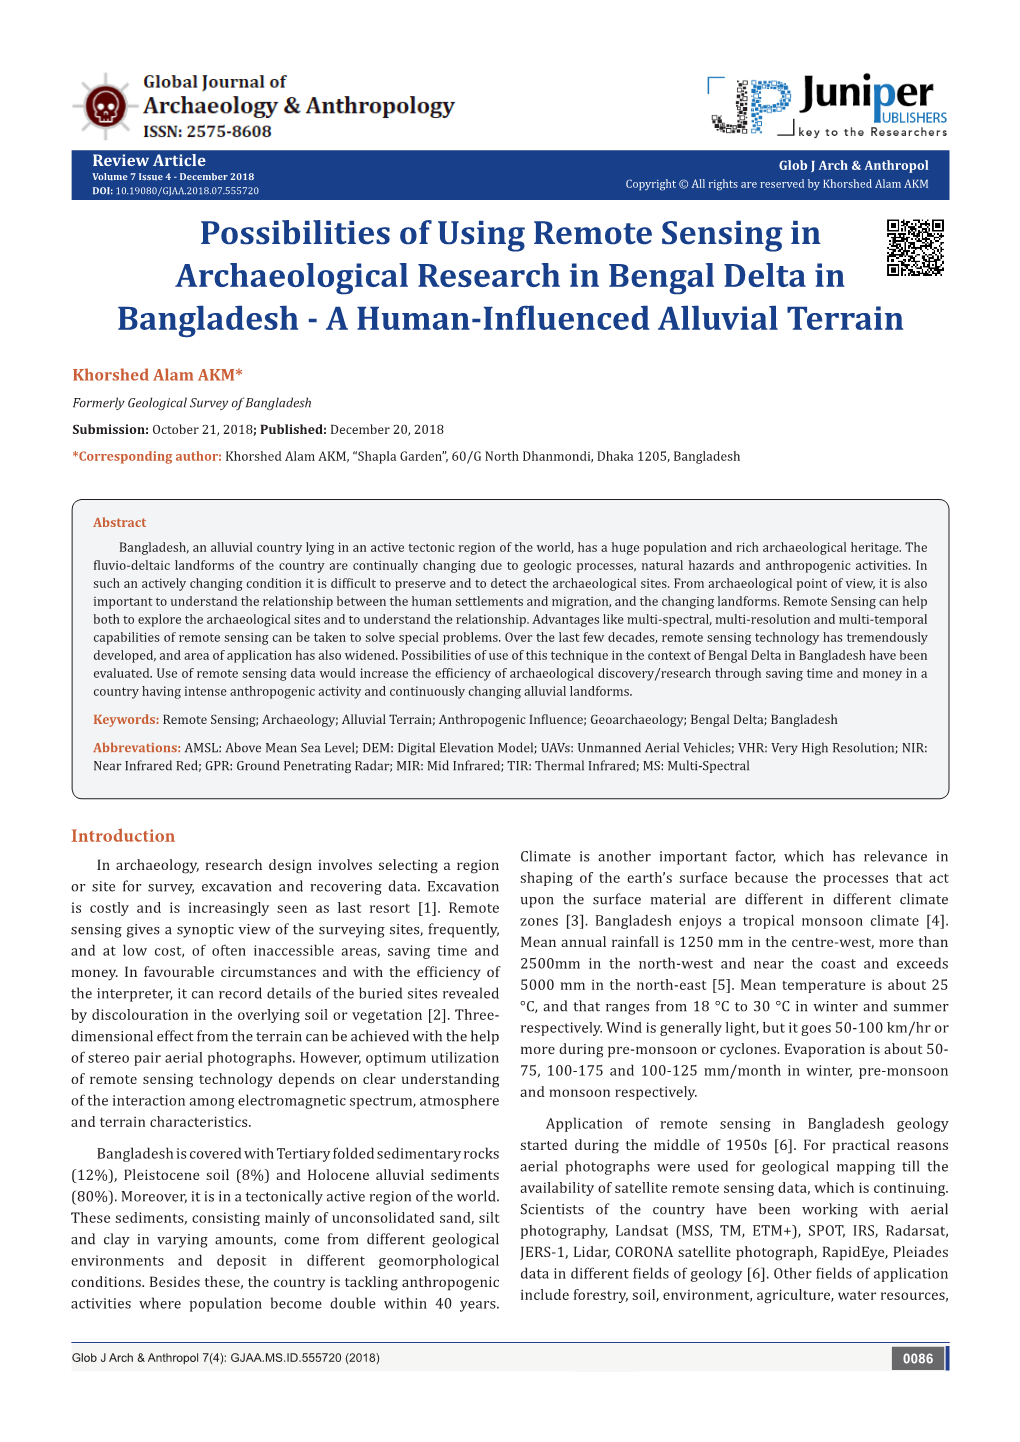 Possibilities of Using Remote Sensing in Archaeological Research in Bengal Delta in Bangladesh - a Human-Influenced Alluvial Terrain